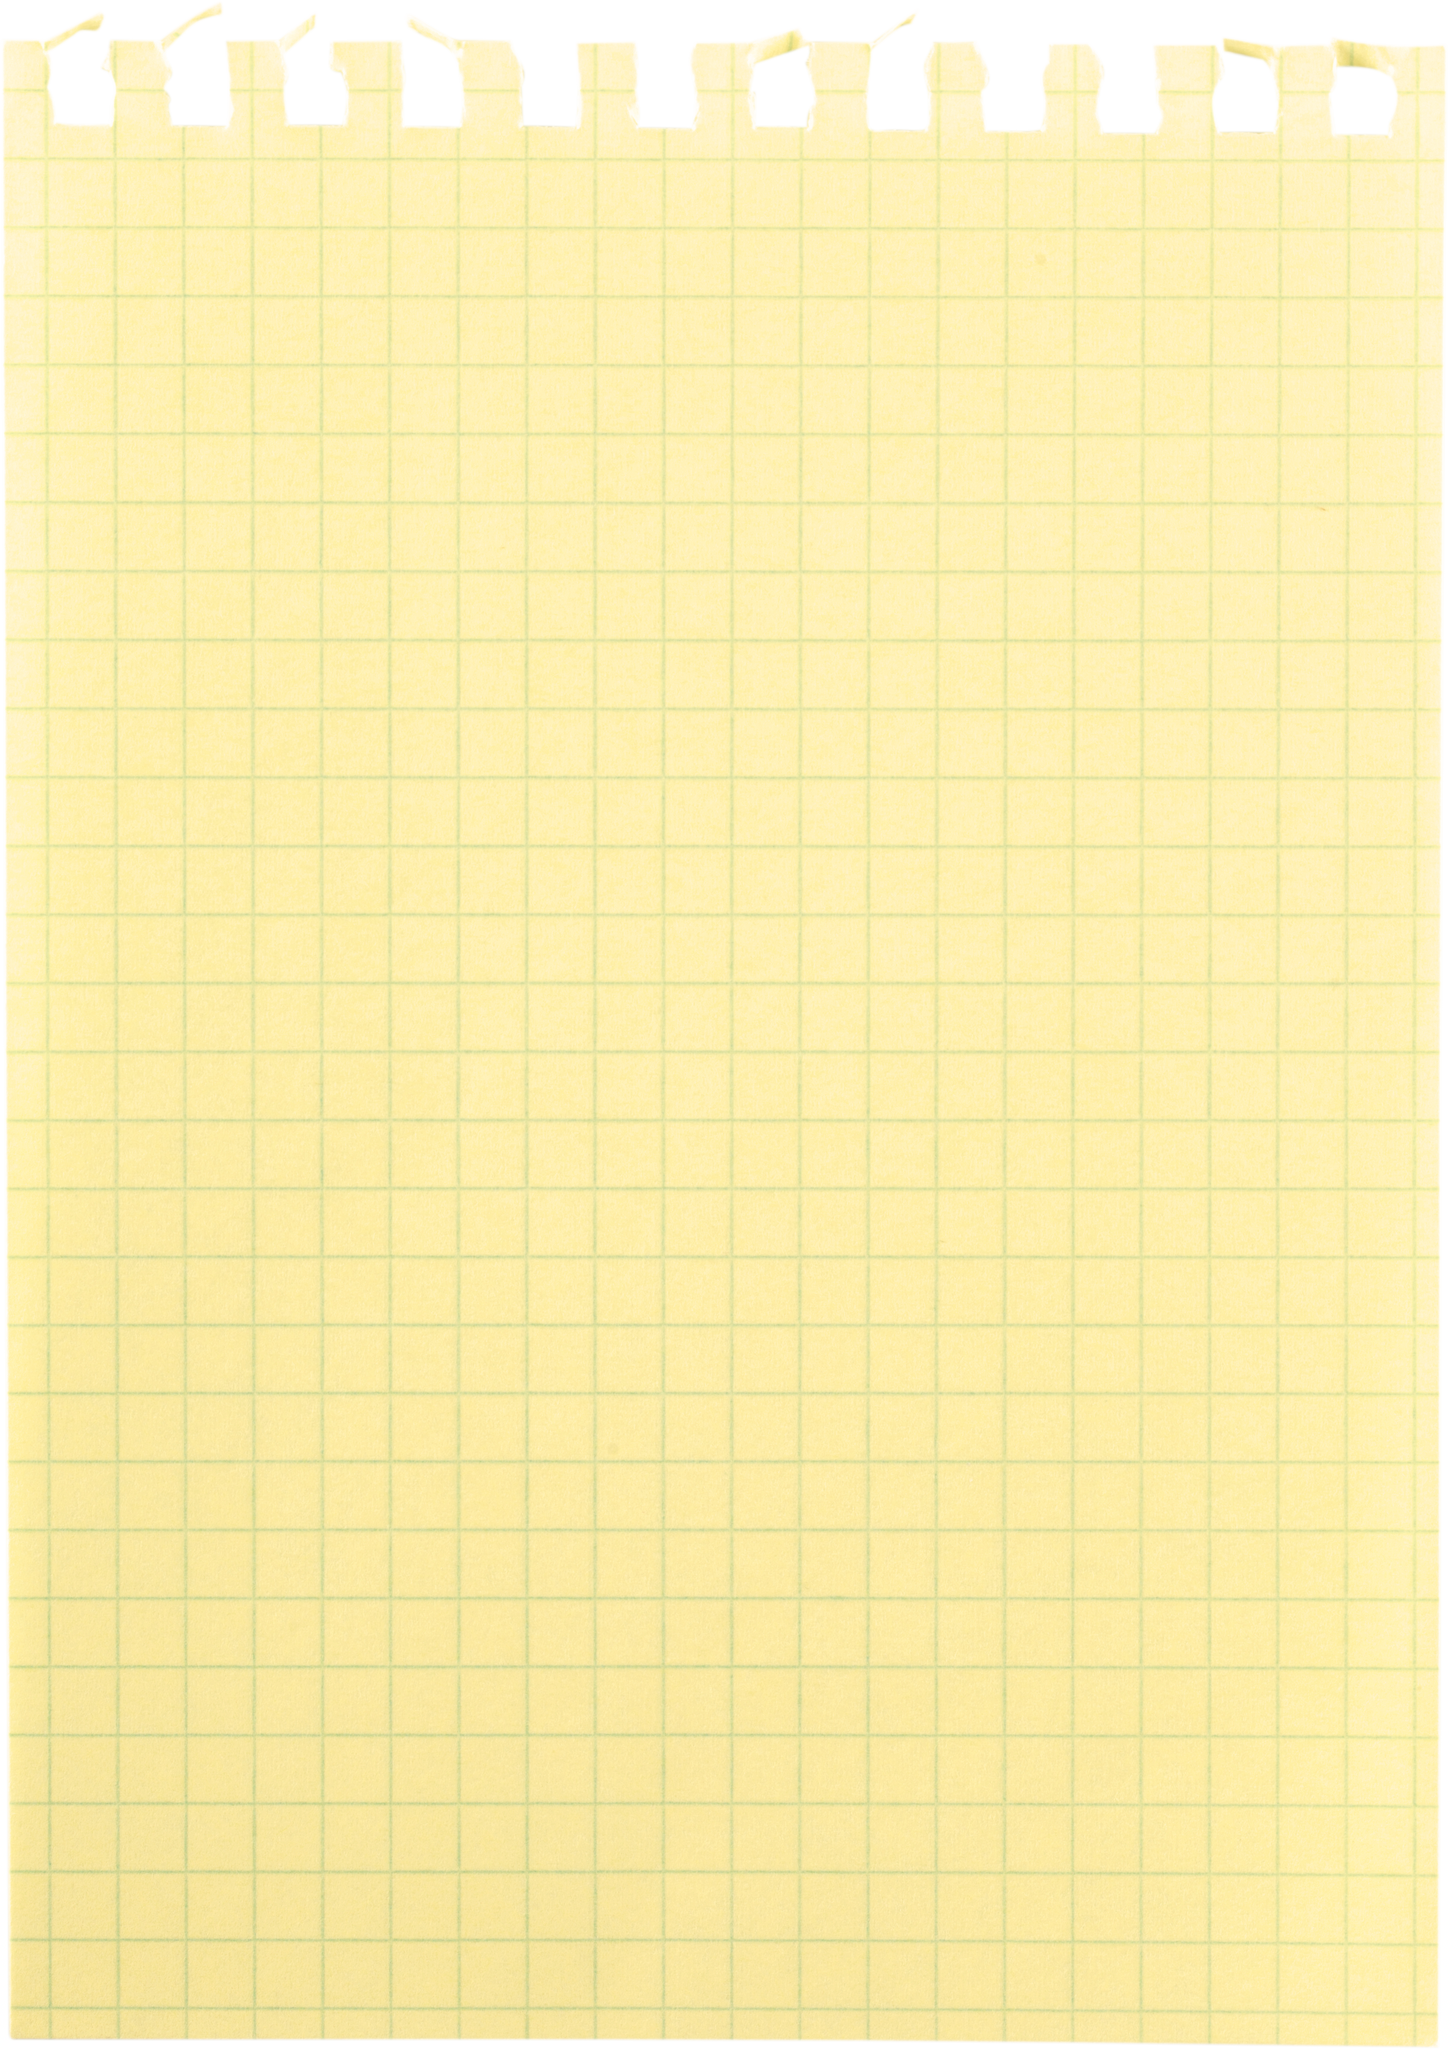 Blank Paper Sheet from Notepad - Isolated